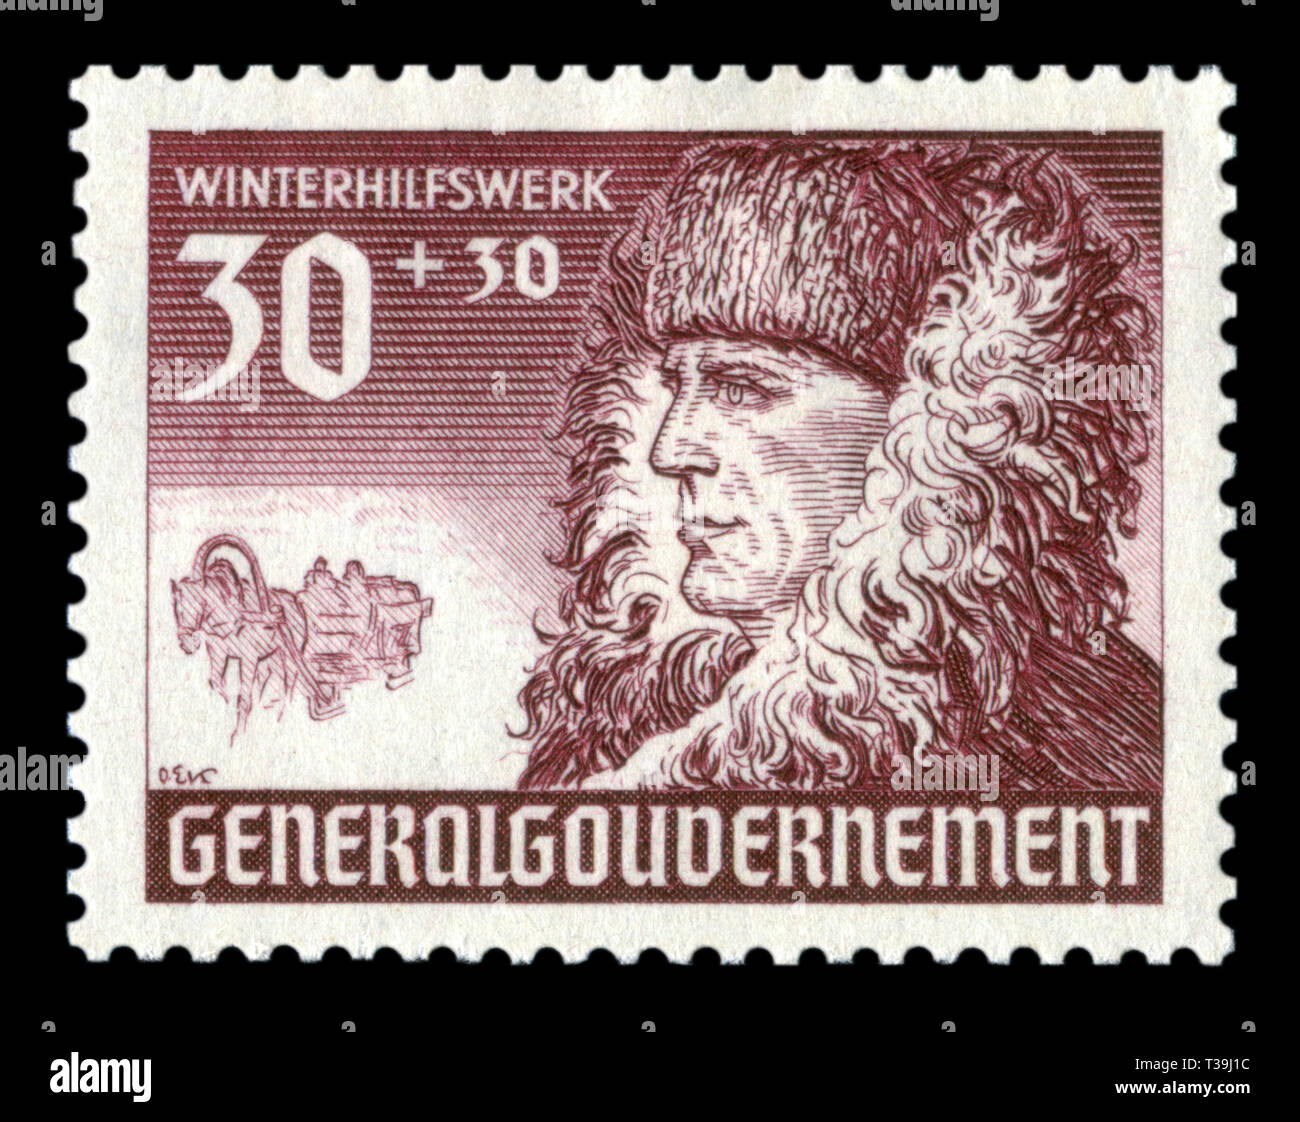 German historical stamp: portrait of a man in a fur coat, a sleigh pulled by a horse. Series 'Winter Welfare' issue 1940, Polish Governor-General Stock Photo